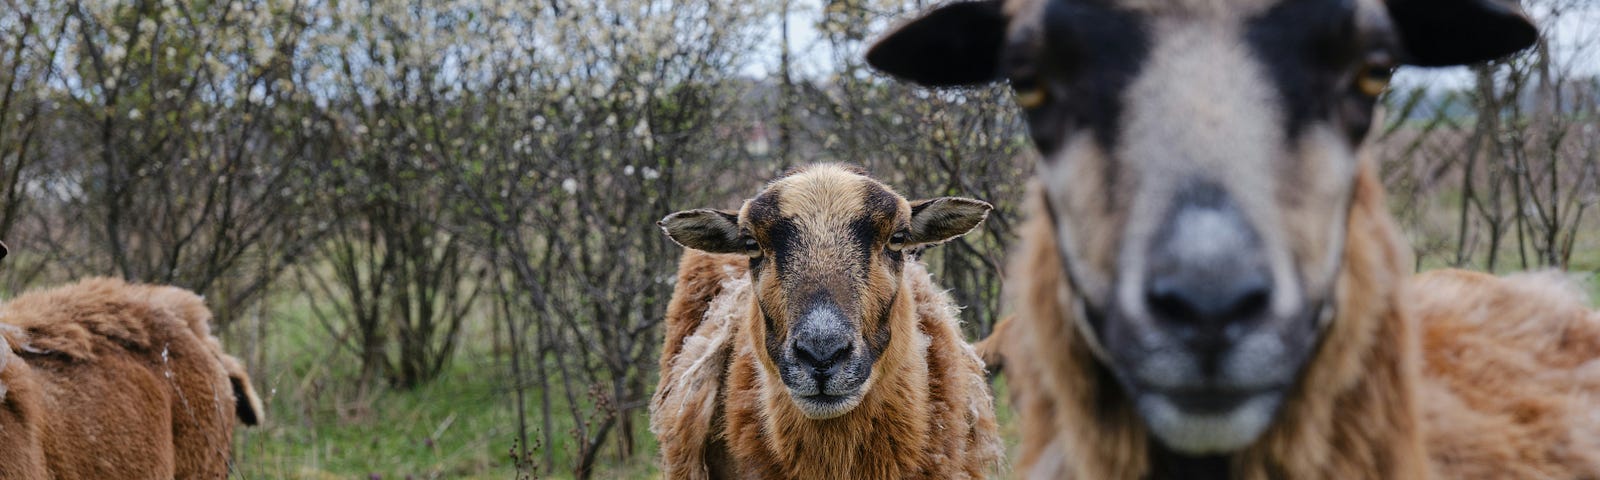 Goats standing in a field. In foreground, blurry male staring into camera. In focus, a female goat looking at the camera.